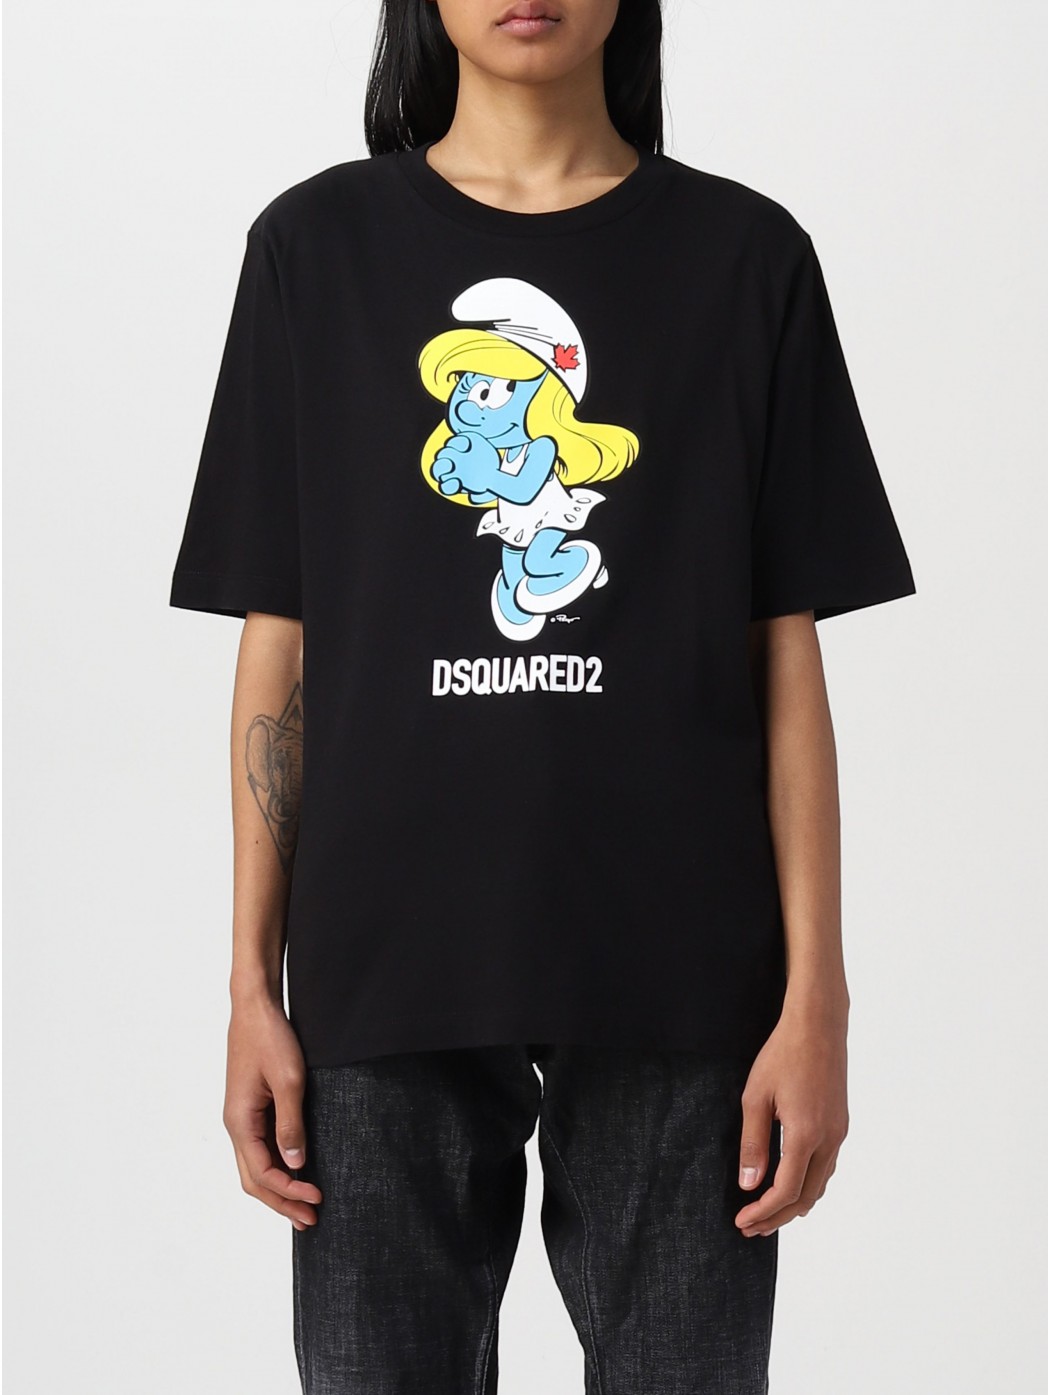 T-SHIRT DS2 SMURF DSQUARED2...